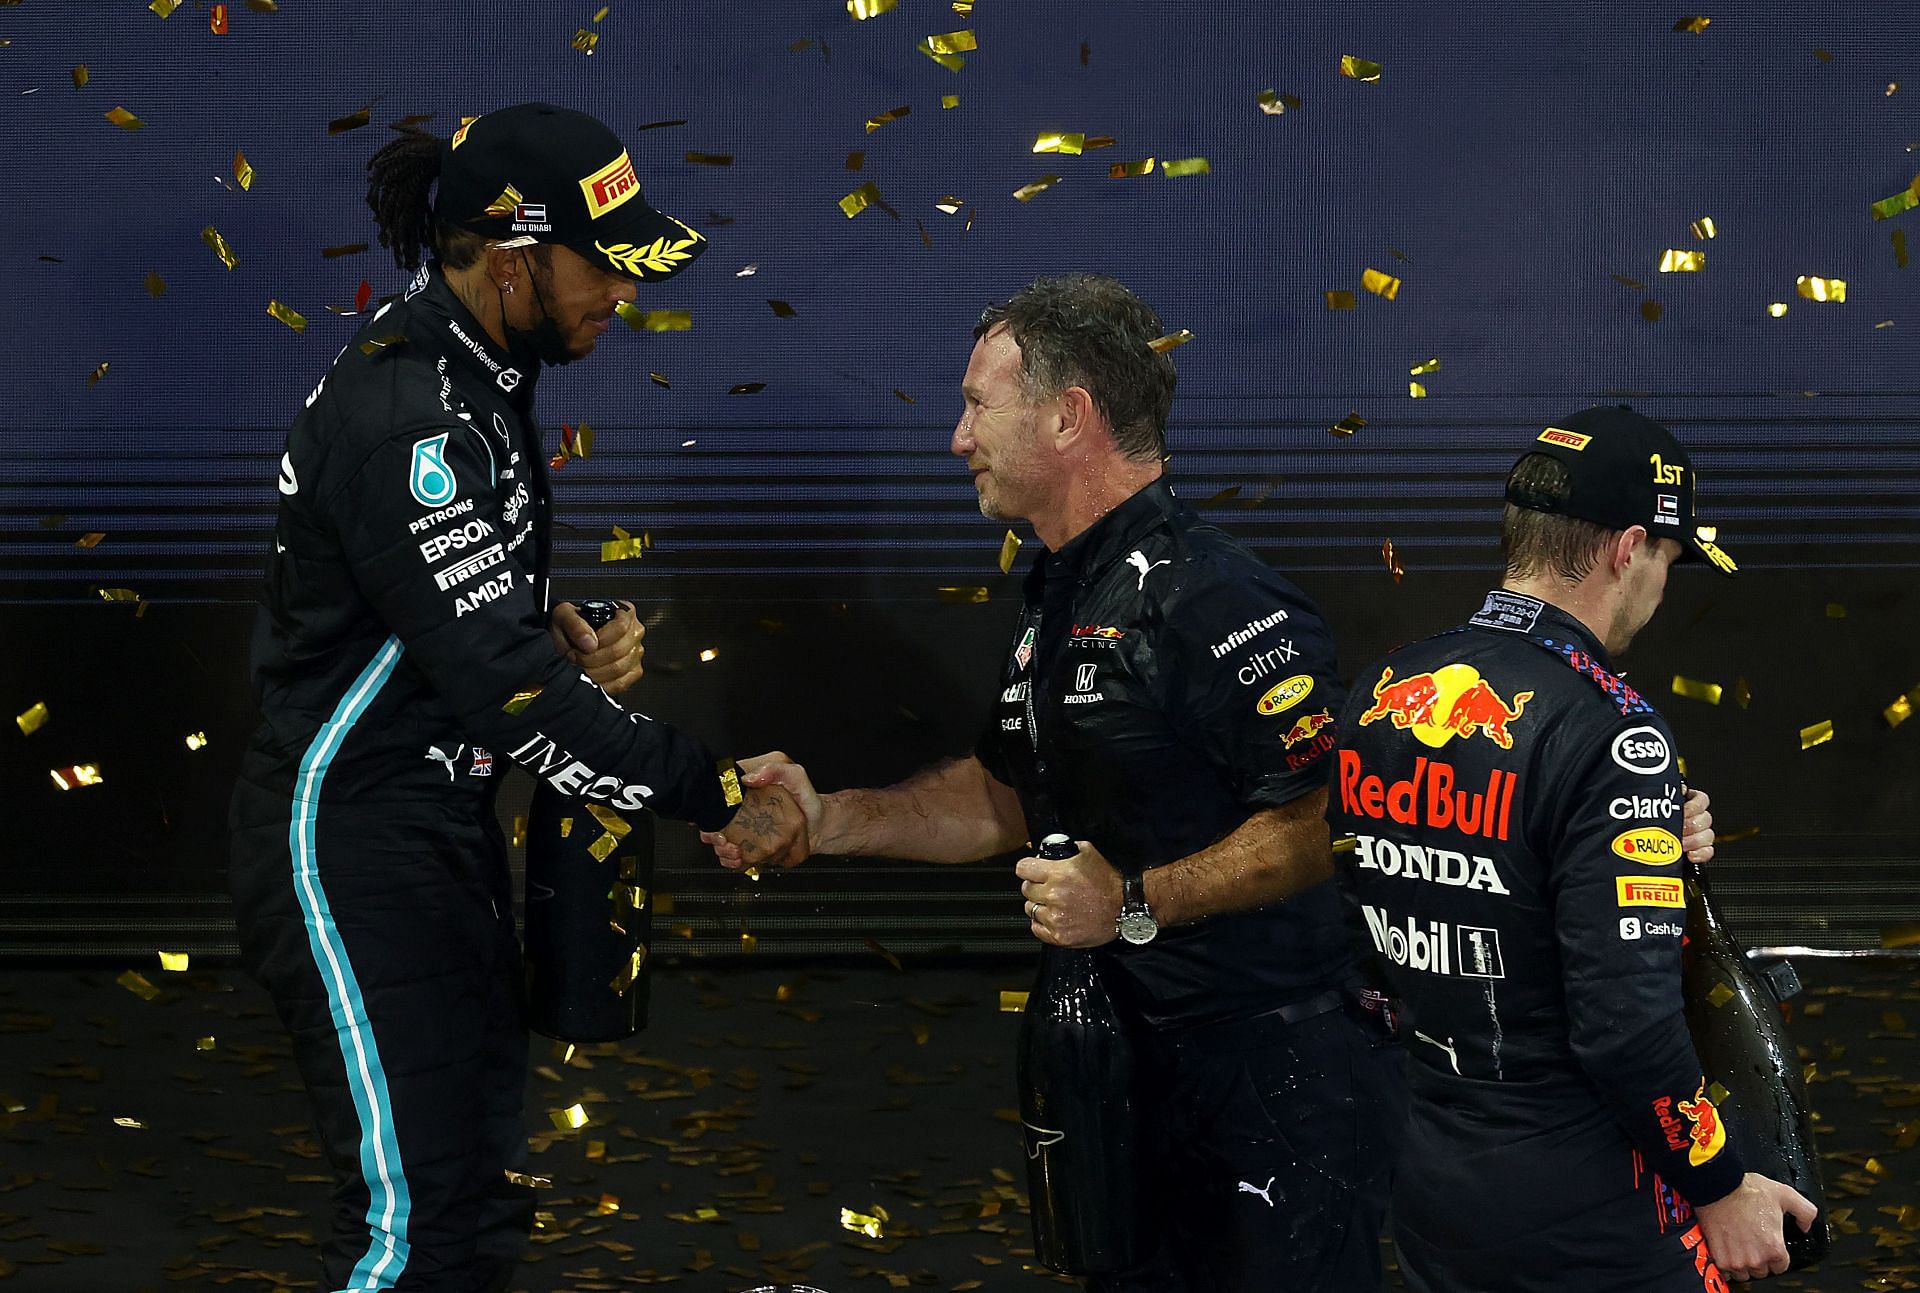 Red Bull Racing Team Principal Christian Horner shakes hands with Lewis Hamilton on the podium during 2021 Abu Dhabi GP. (Photo by Clive Rose/Getty Images)